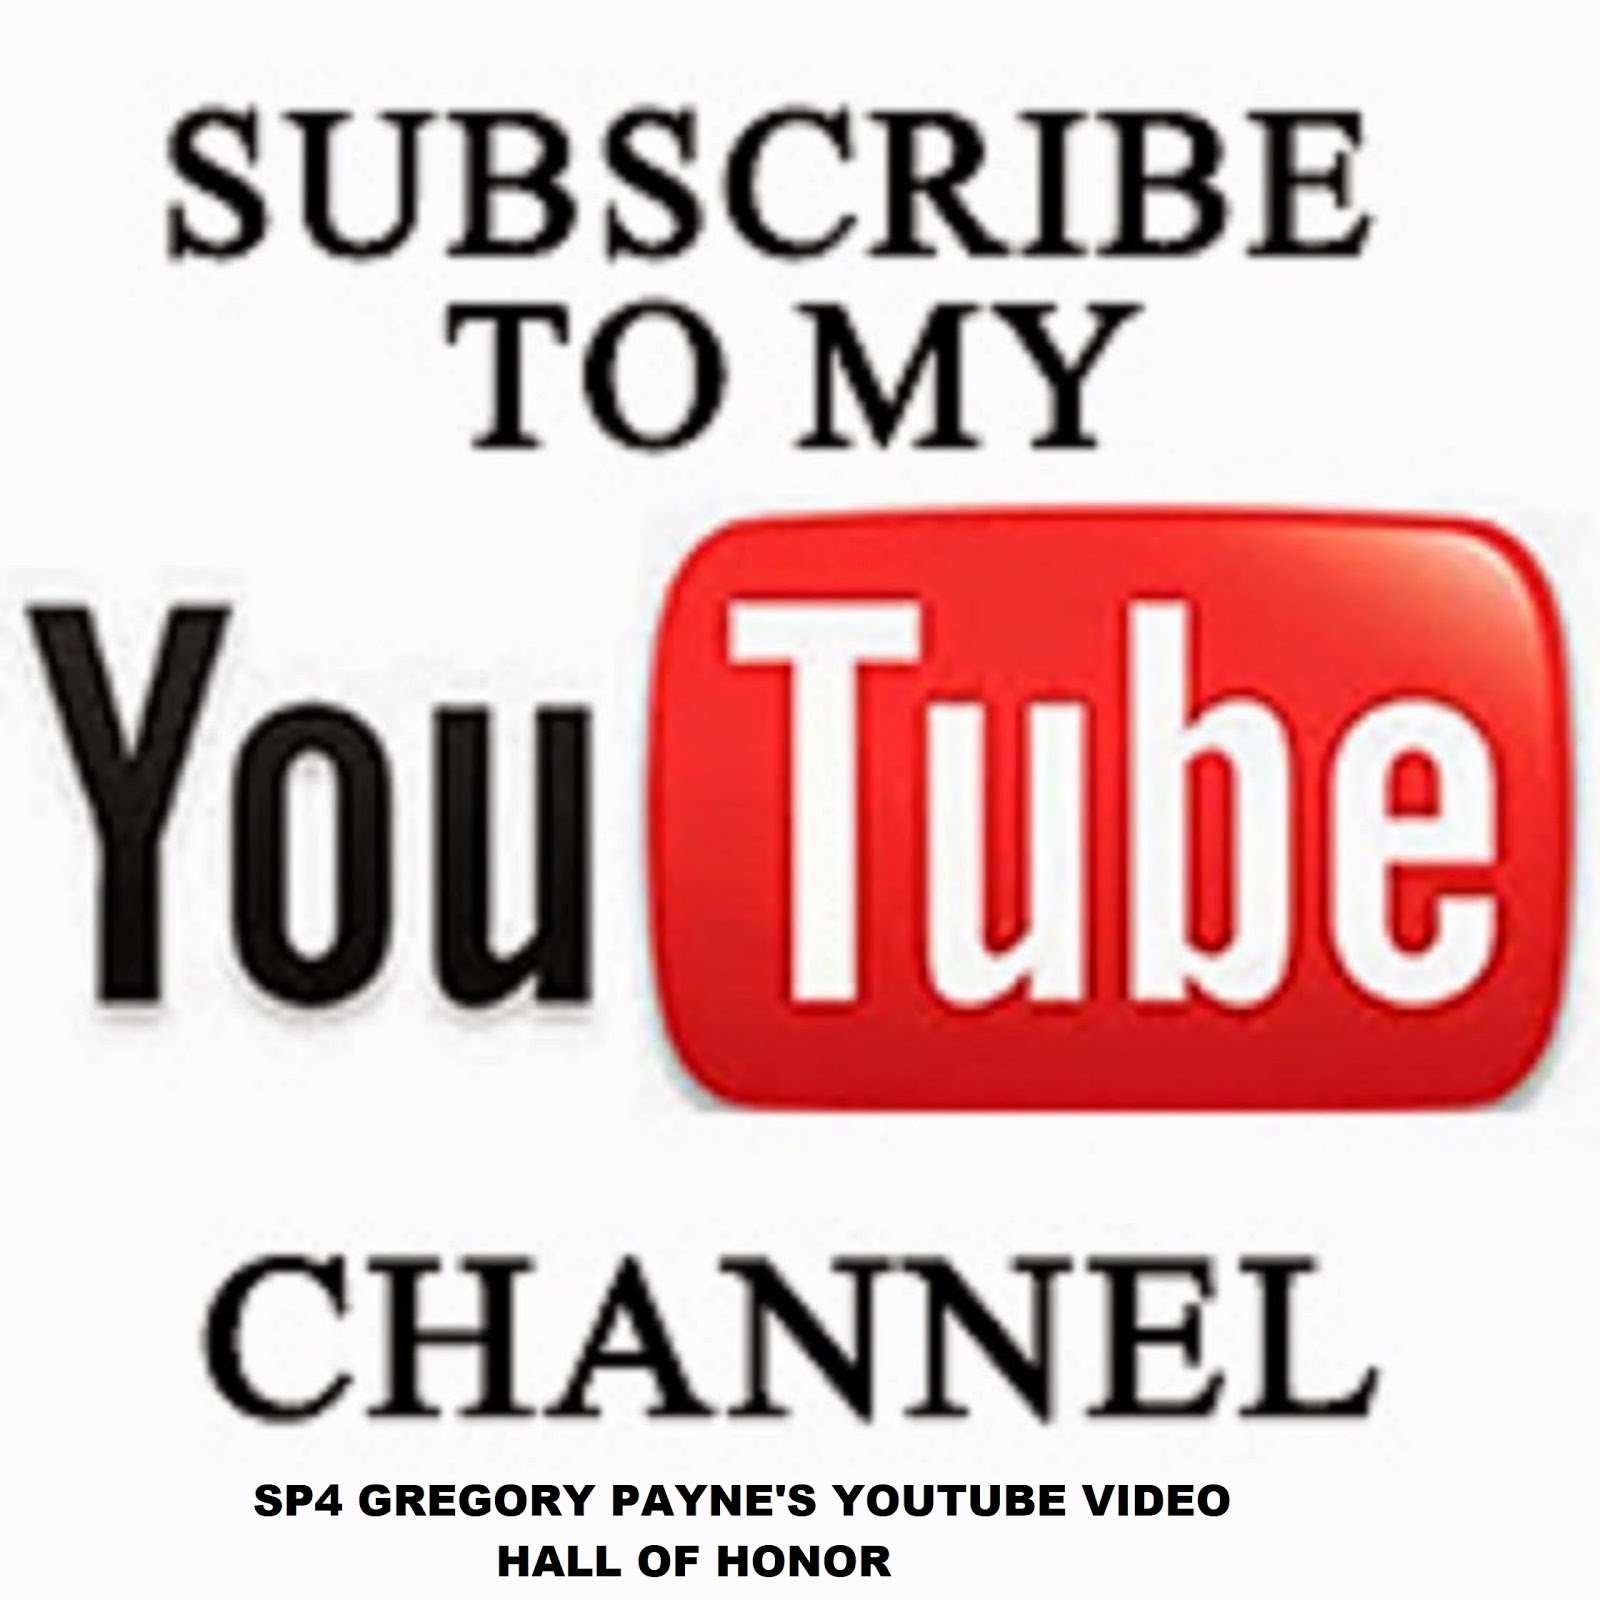 SUBSCRIBETO MY YOUTUBE CHANNEL